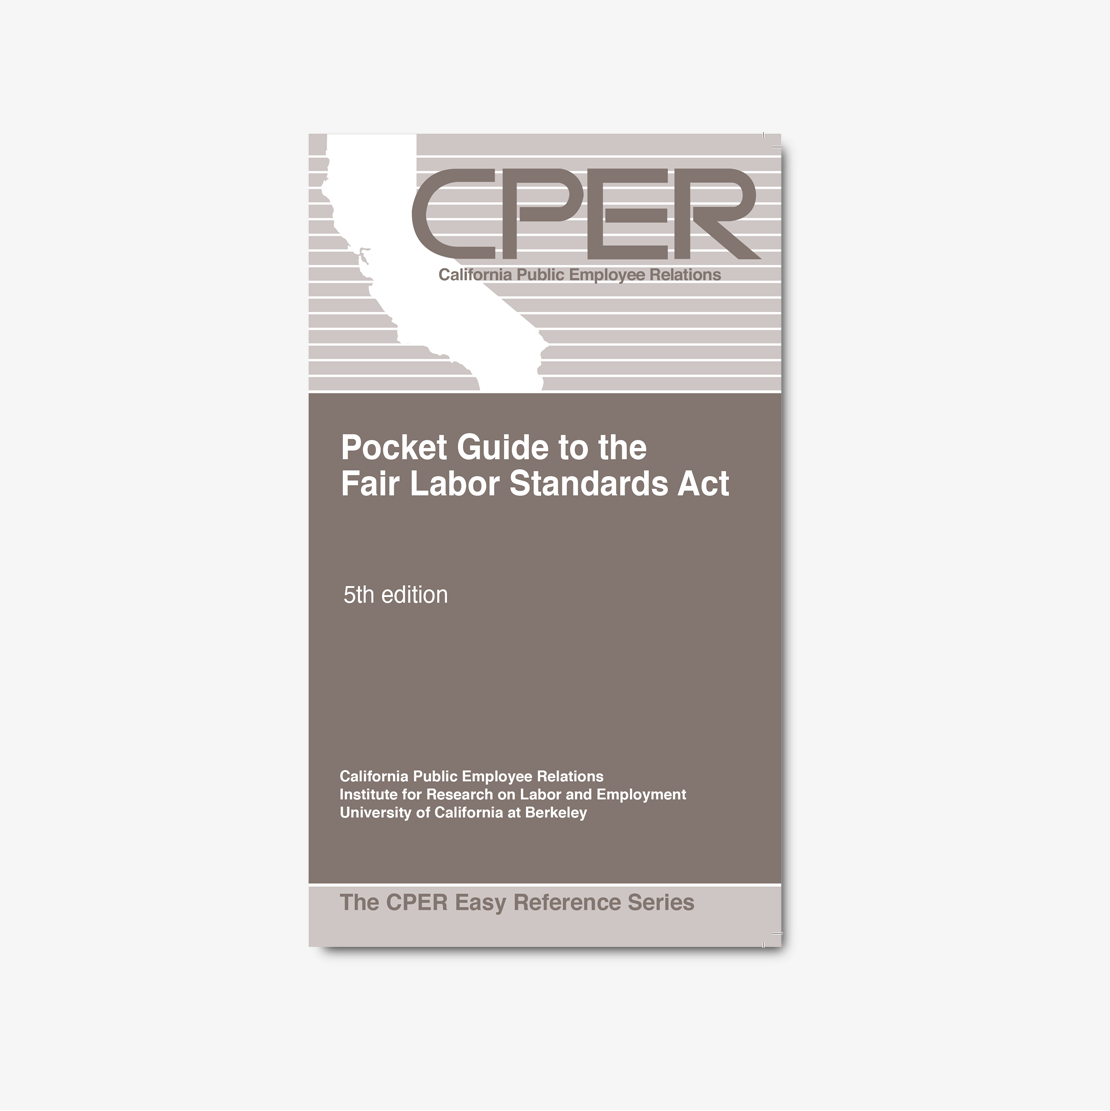 Pocket Guide to the Fair Labor Standards Act